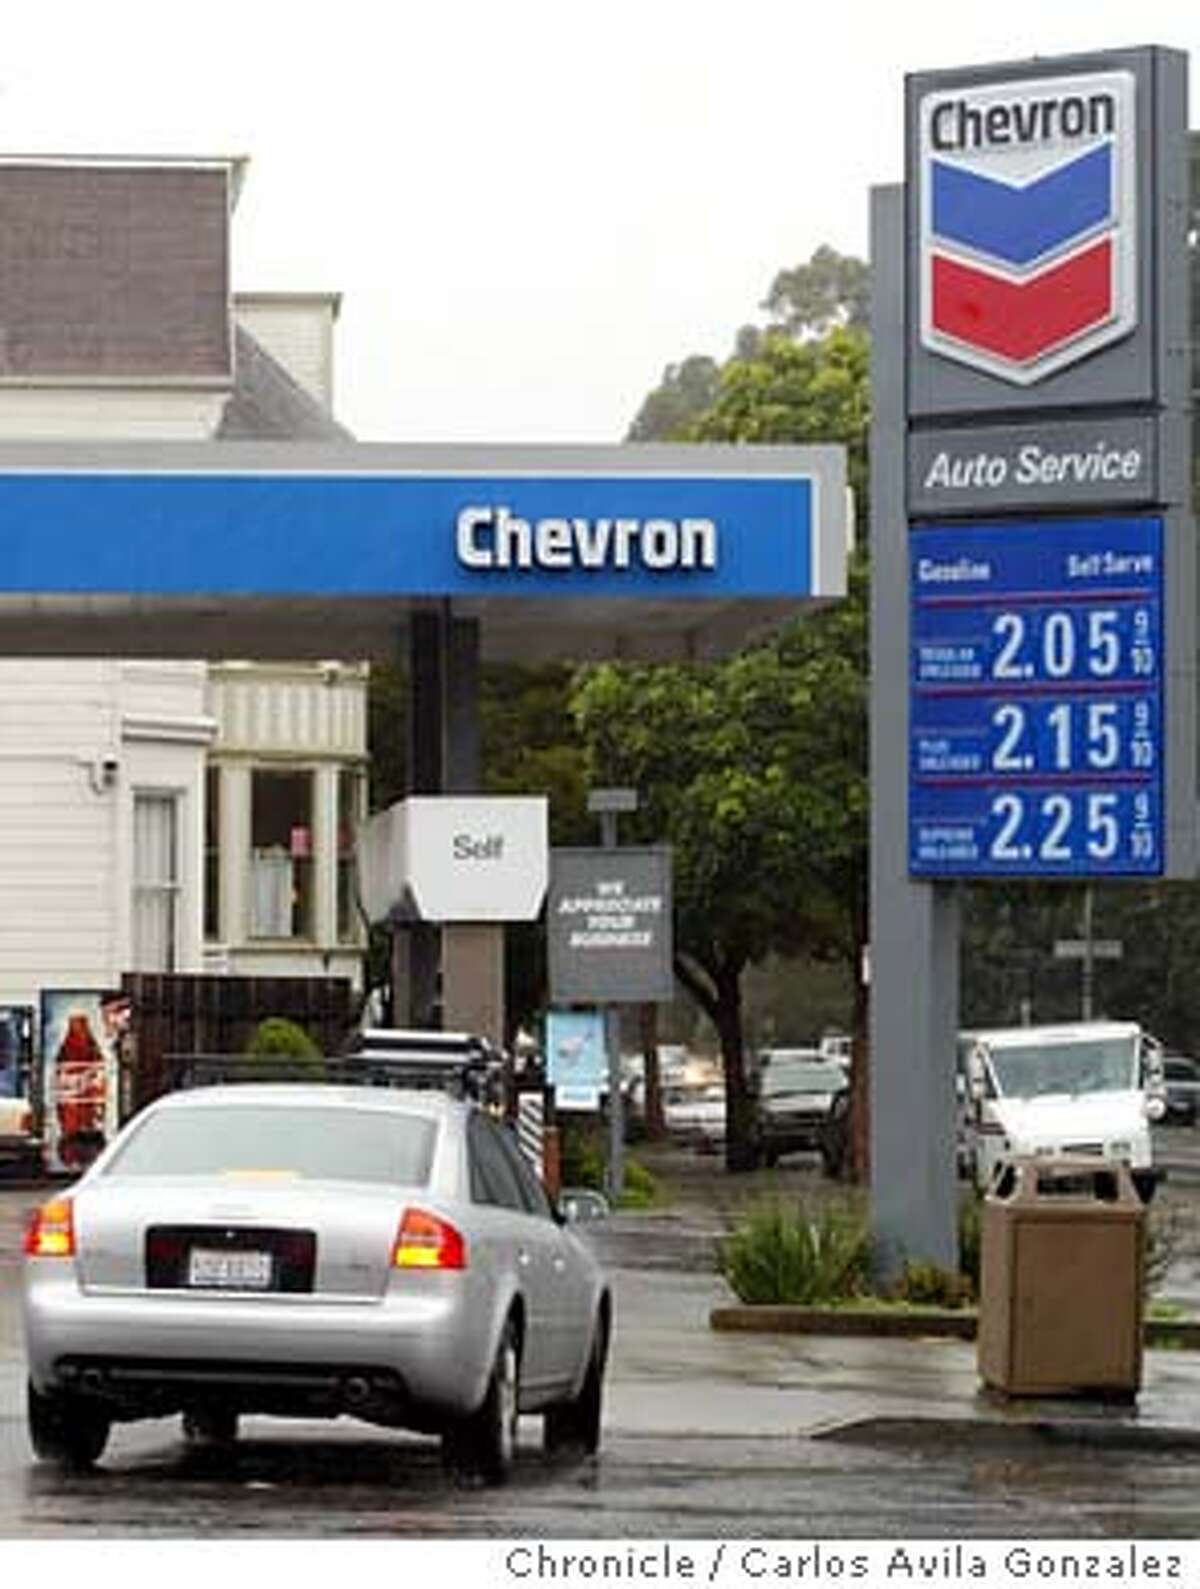 A customer pulls into the Chevron gas station at Fell Street and Masonic in San Francisco, Ca., on Tuesday, February 17, 2004, as gas prices have risen in the past few days. Photo taken on 02/17/04, in San Francisco, Ca. Photo by Carlos Avila Gonzalez/The San Francisco Chronicle